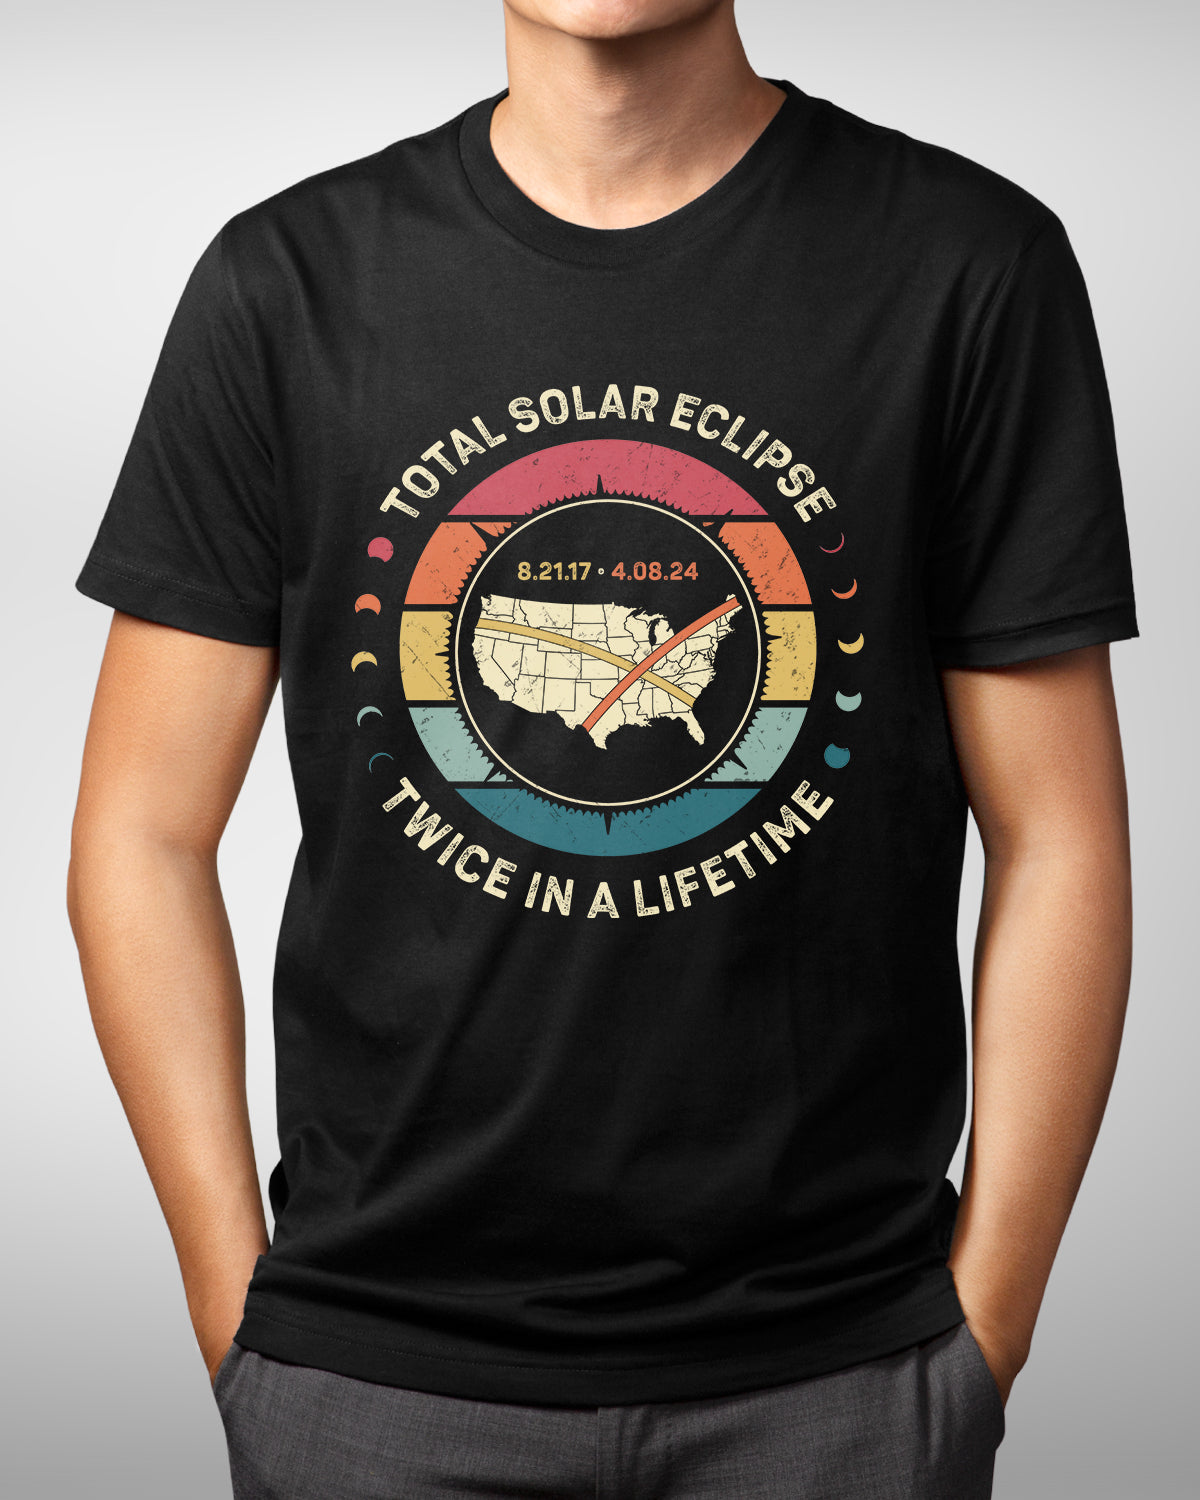 Retro Vintage Solar Eclipse Shirt, Twice in a Lifetime Tee, USA Path of Totality Map, American Eclipse Souvenir Gif